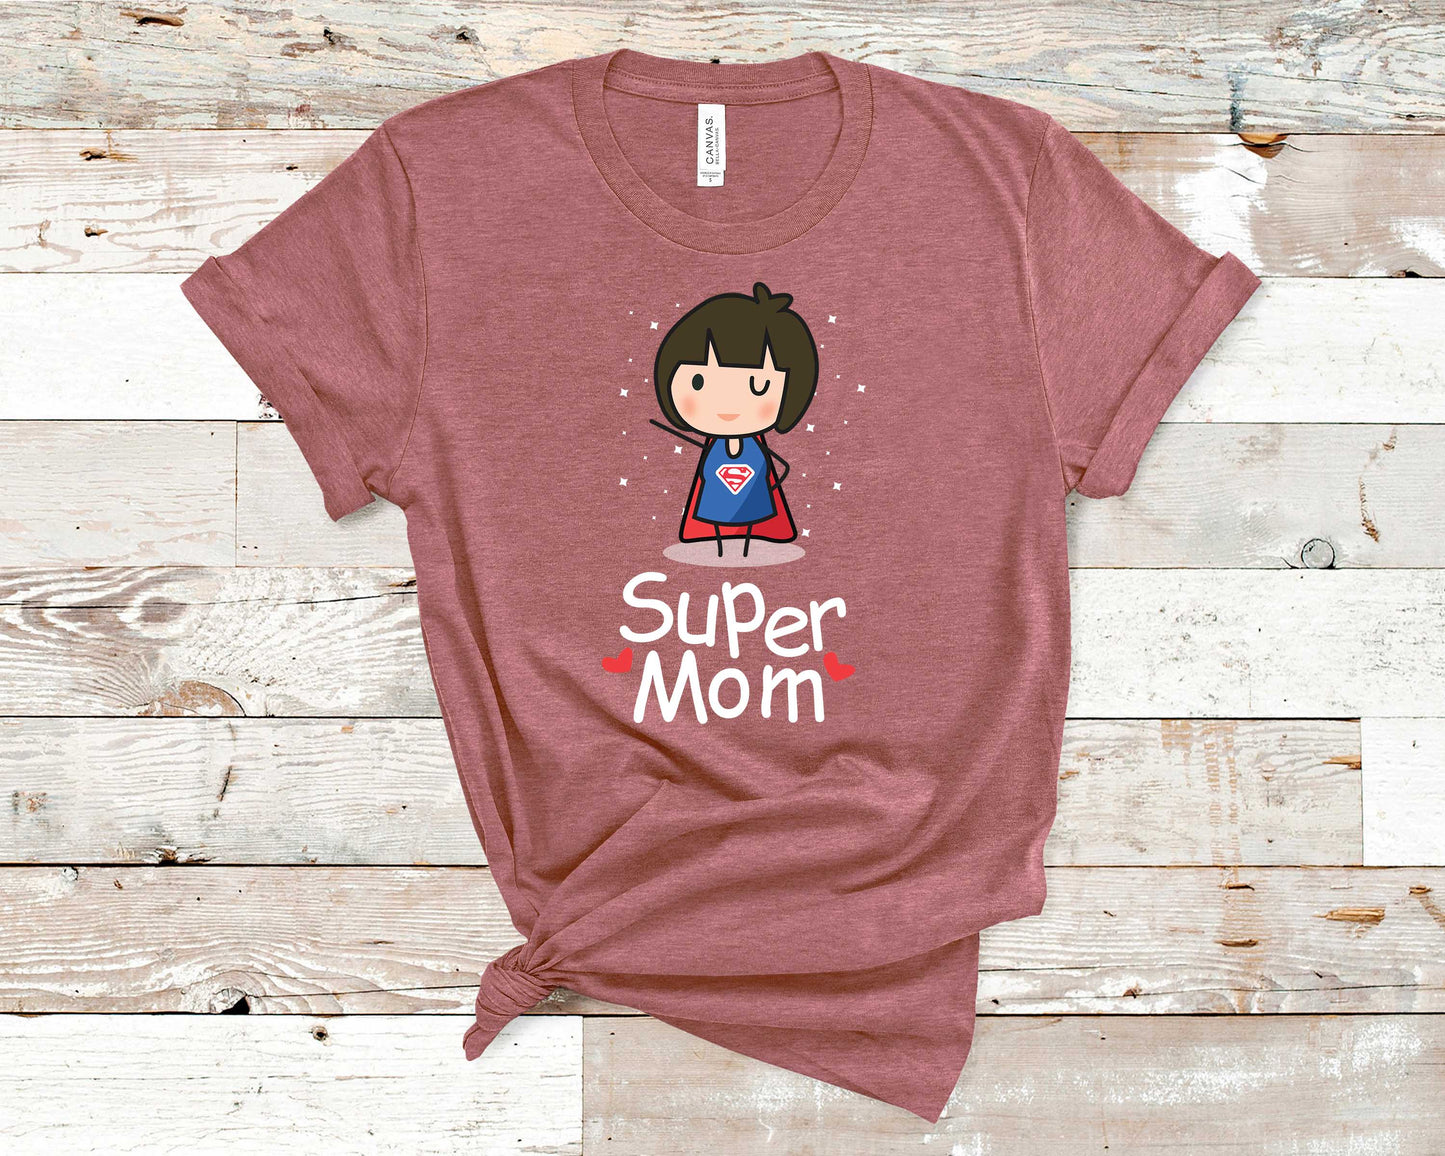 Super Mom - Mother's Day